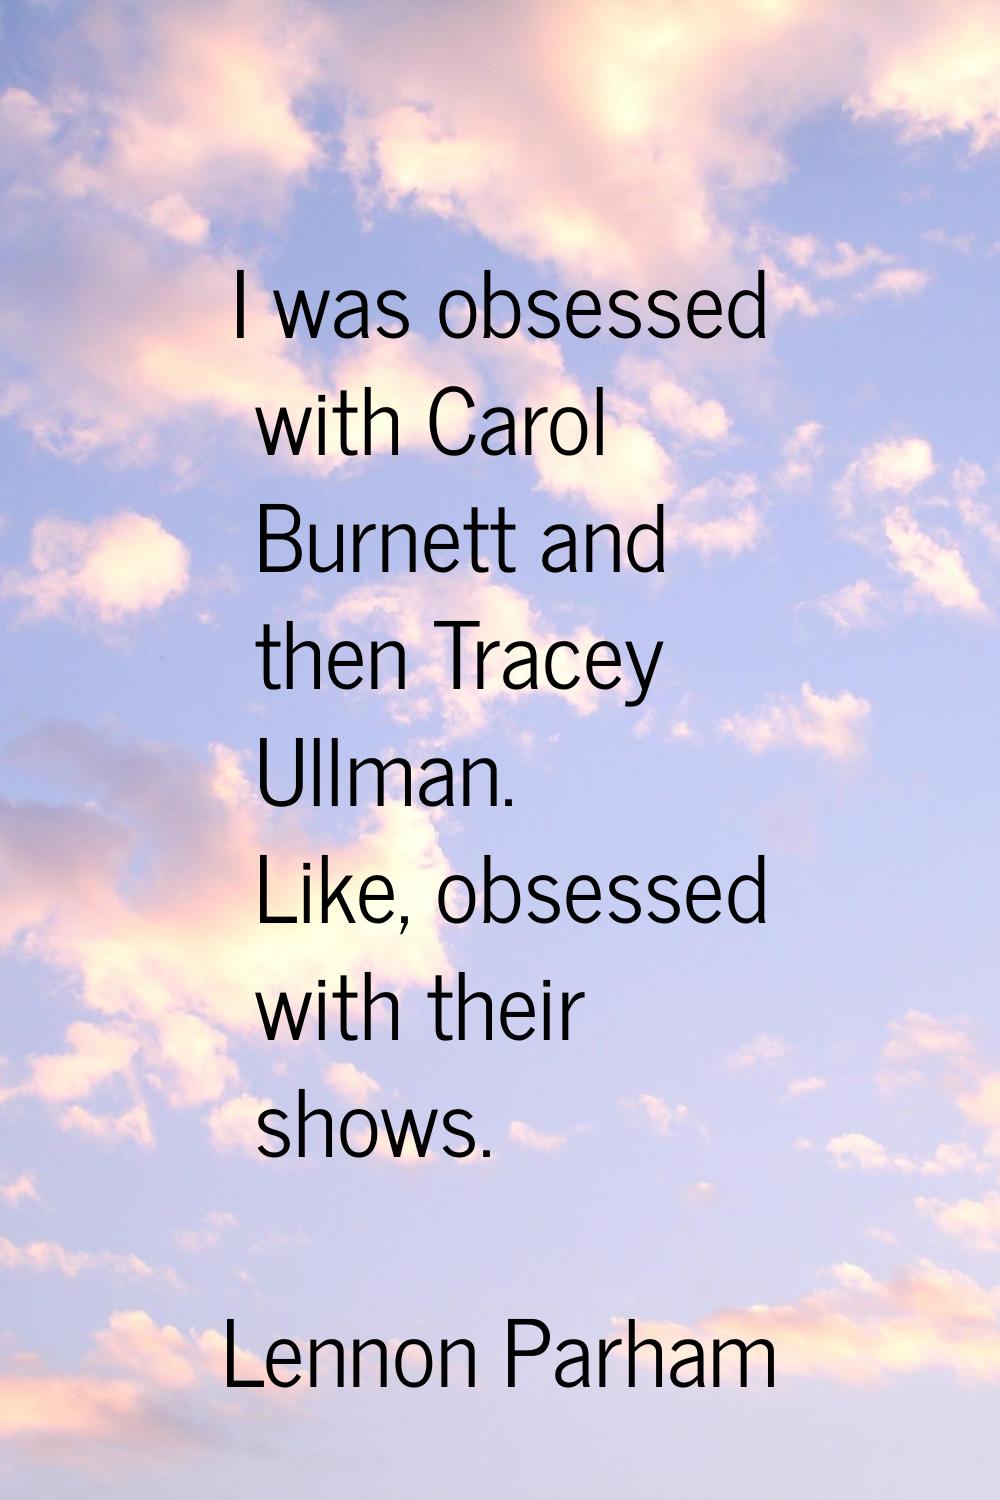 I was obsessed with Carol Burnett and then Tracey Ullman. Like, obsessed with their shows.